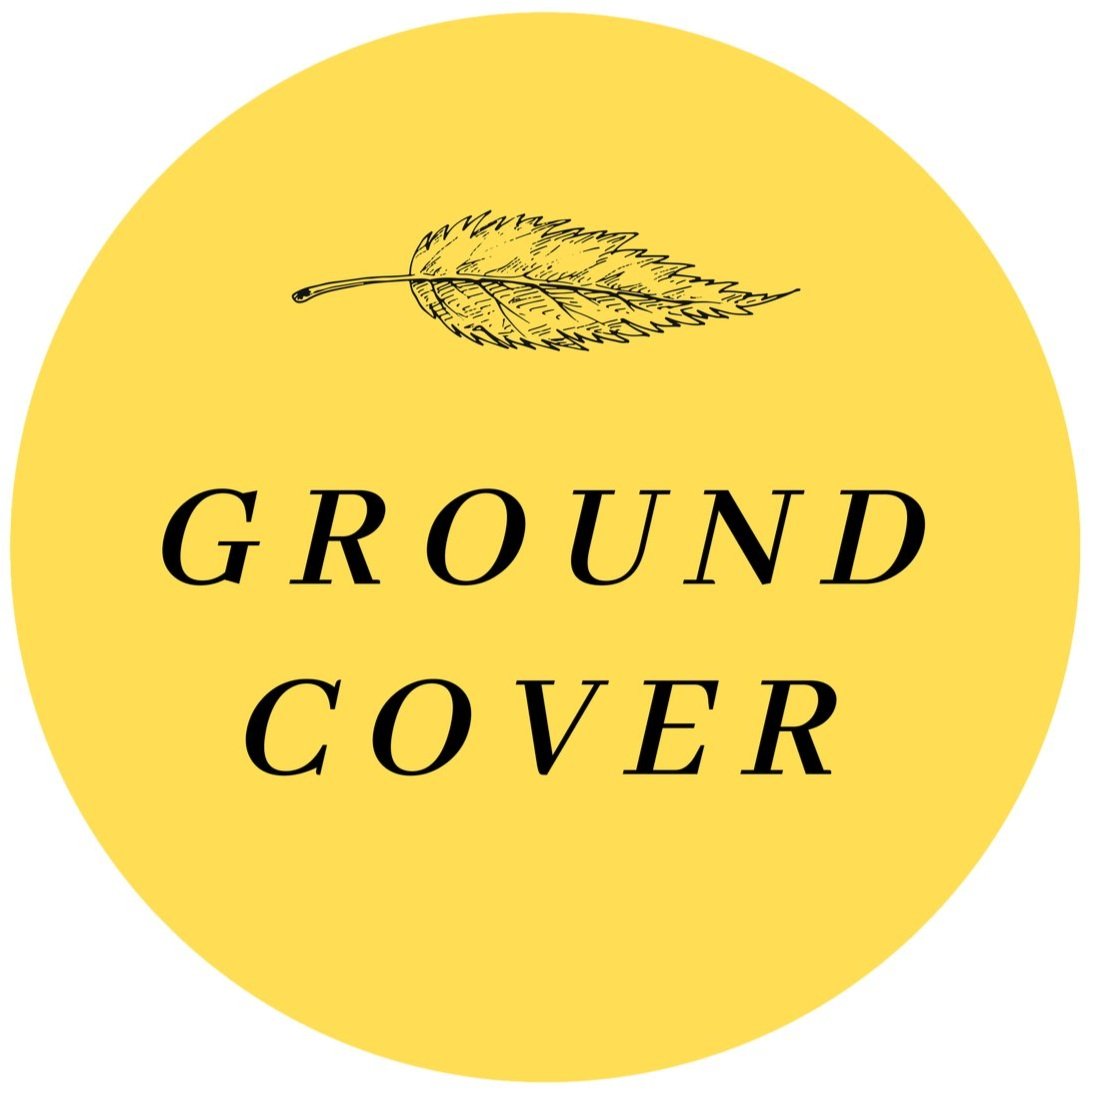 Groundcover